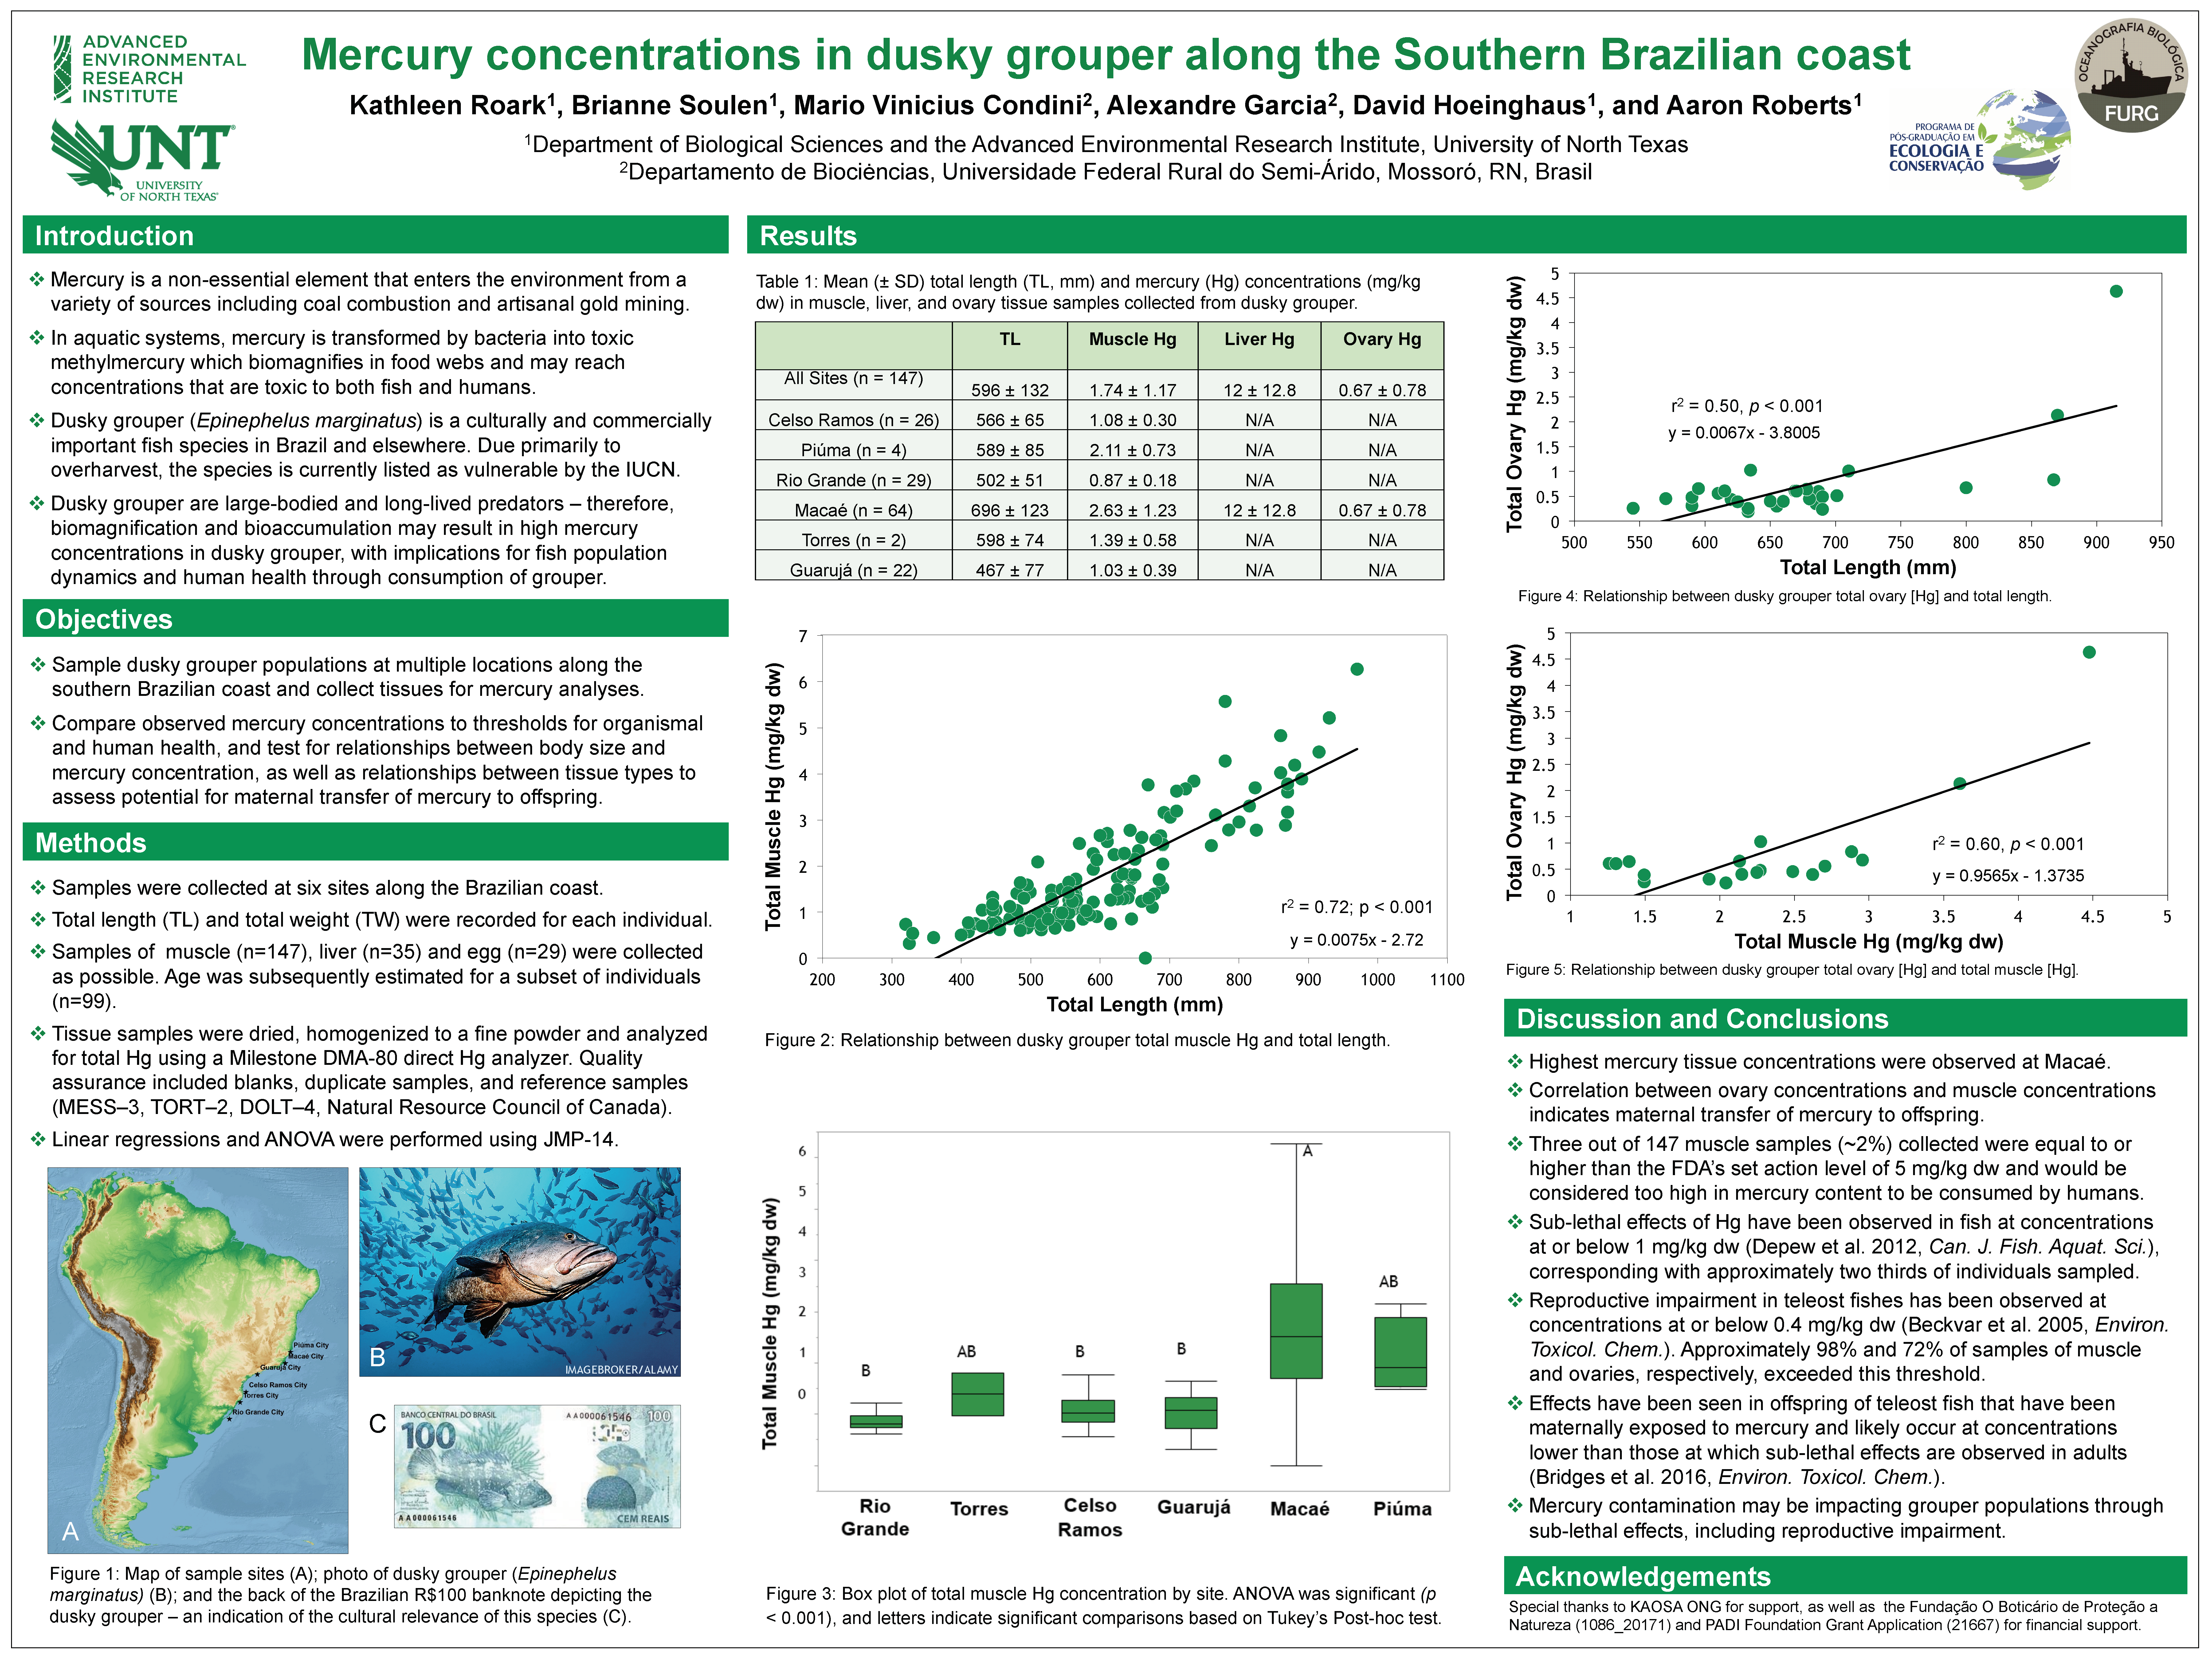 Mercury concentrations in dusky grouper along the Southern Brazilian coast